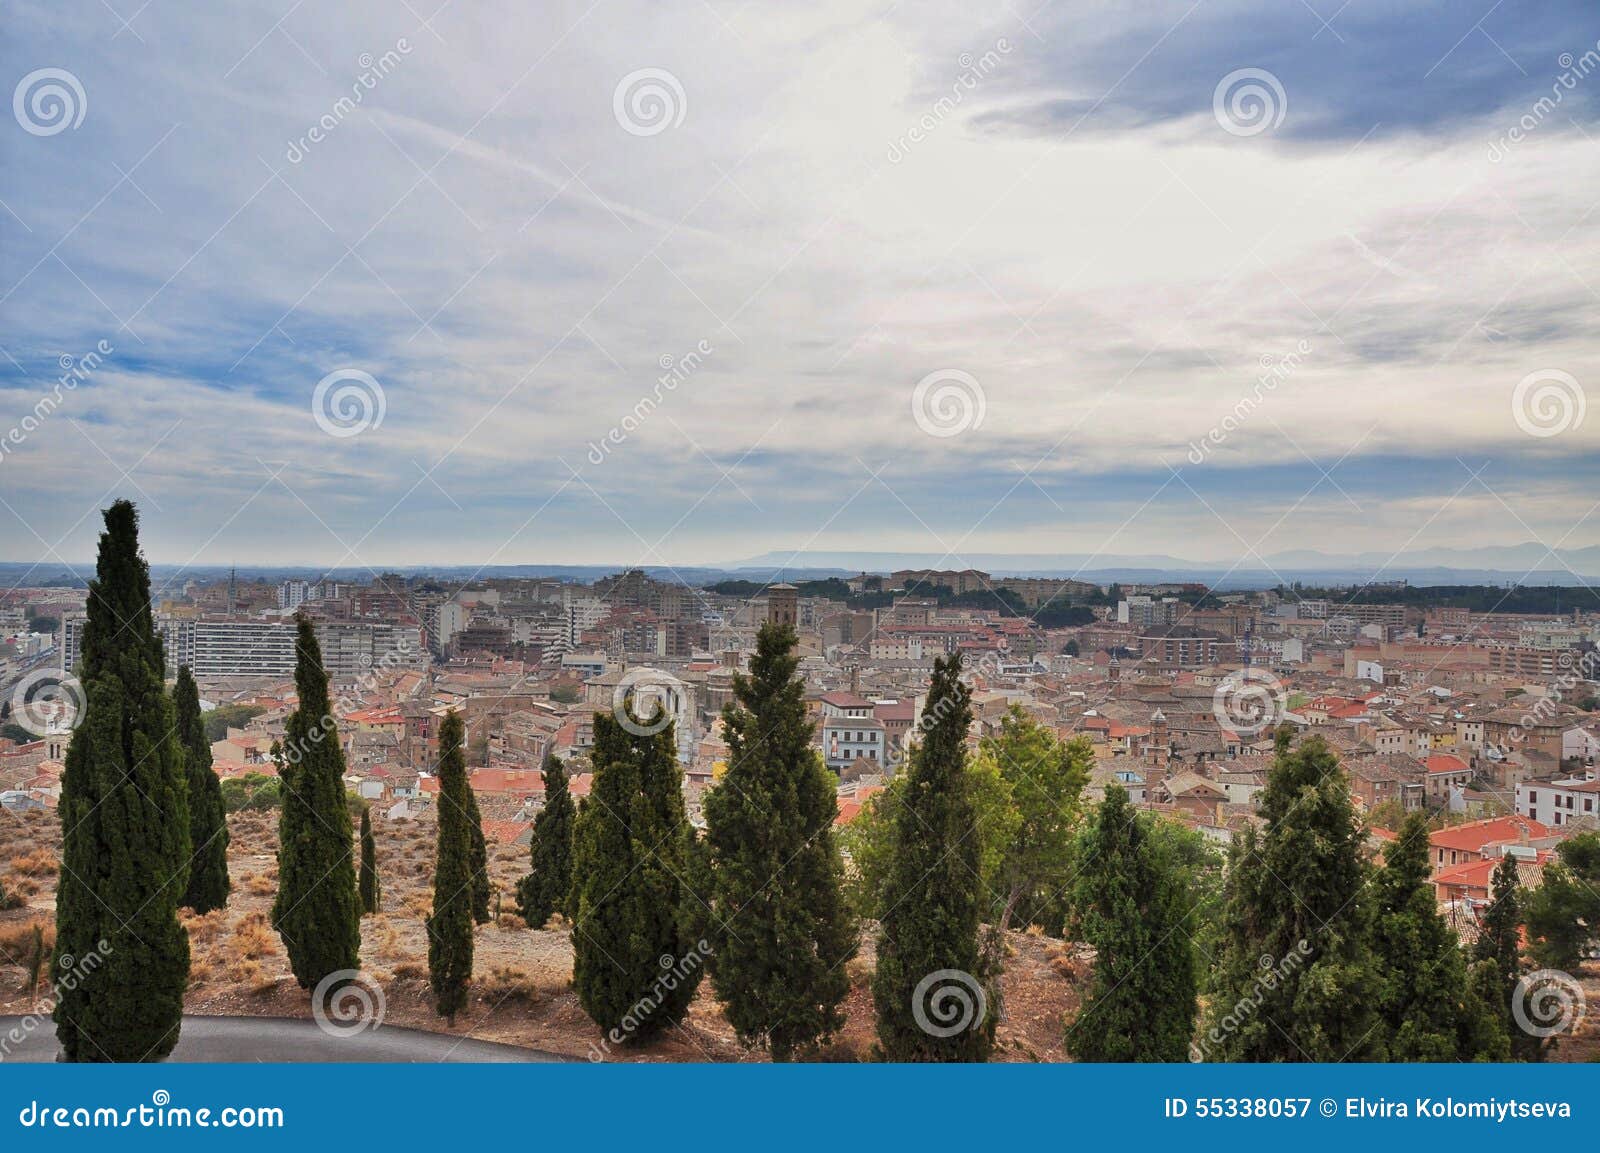 panorama of the city of tudela